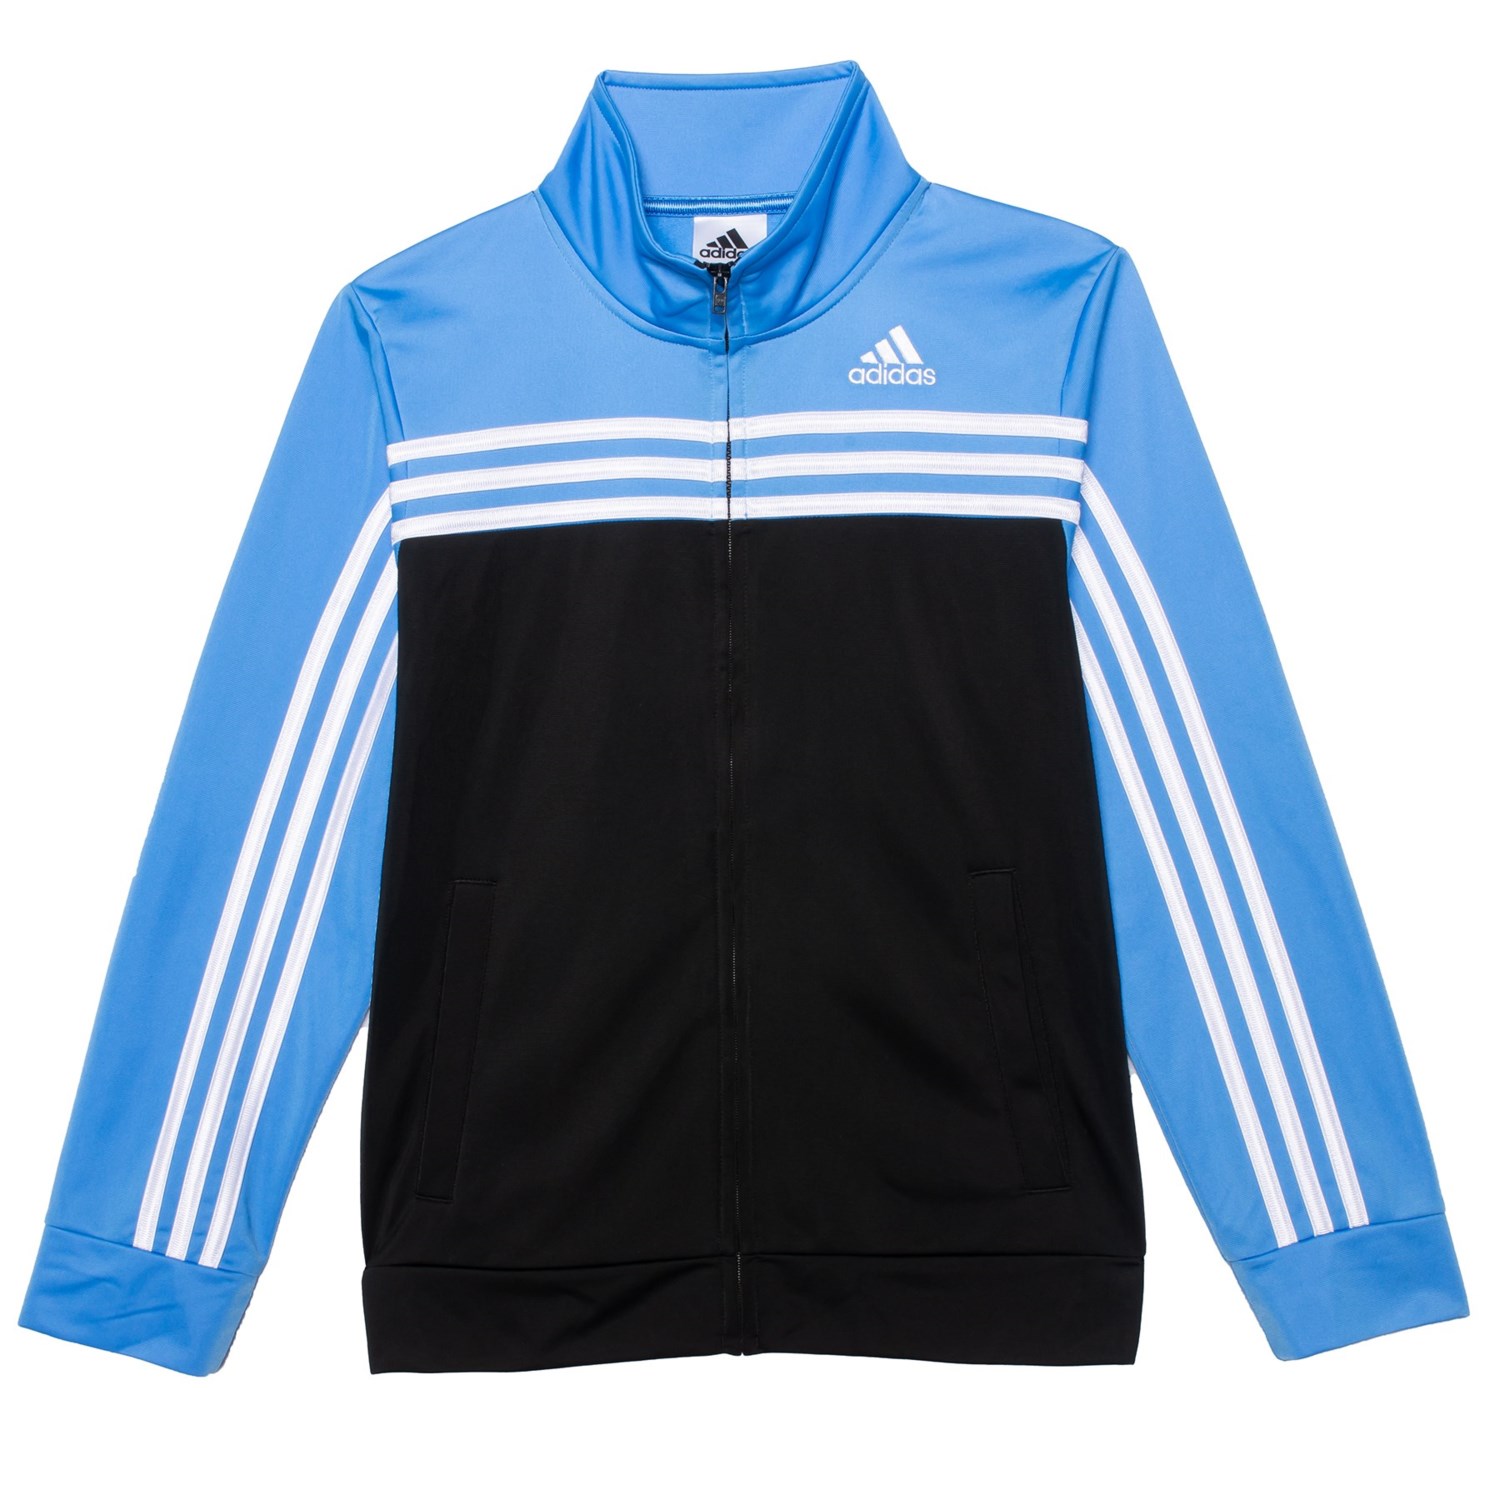 what colour is the adidas jacket